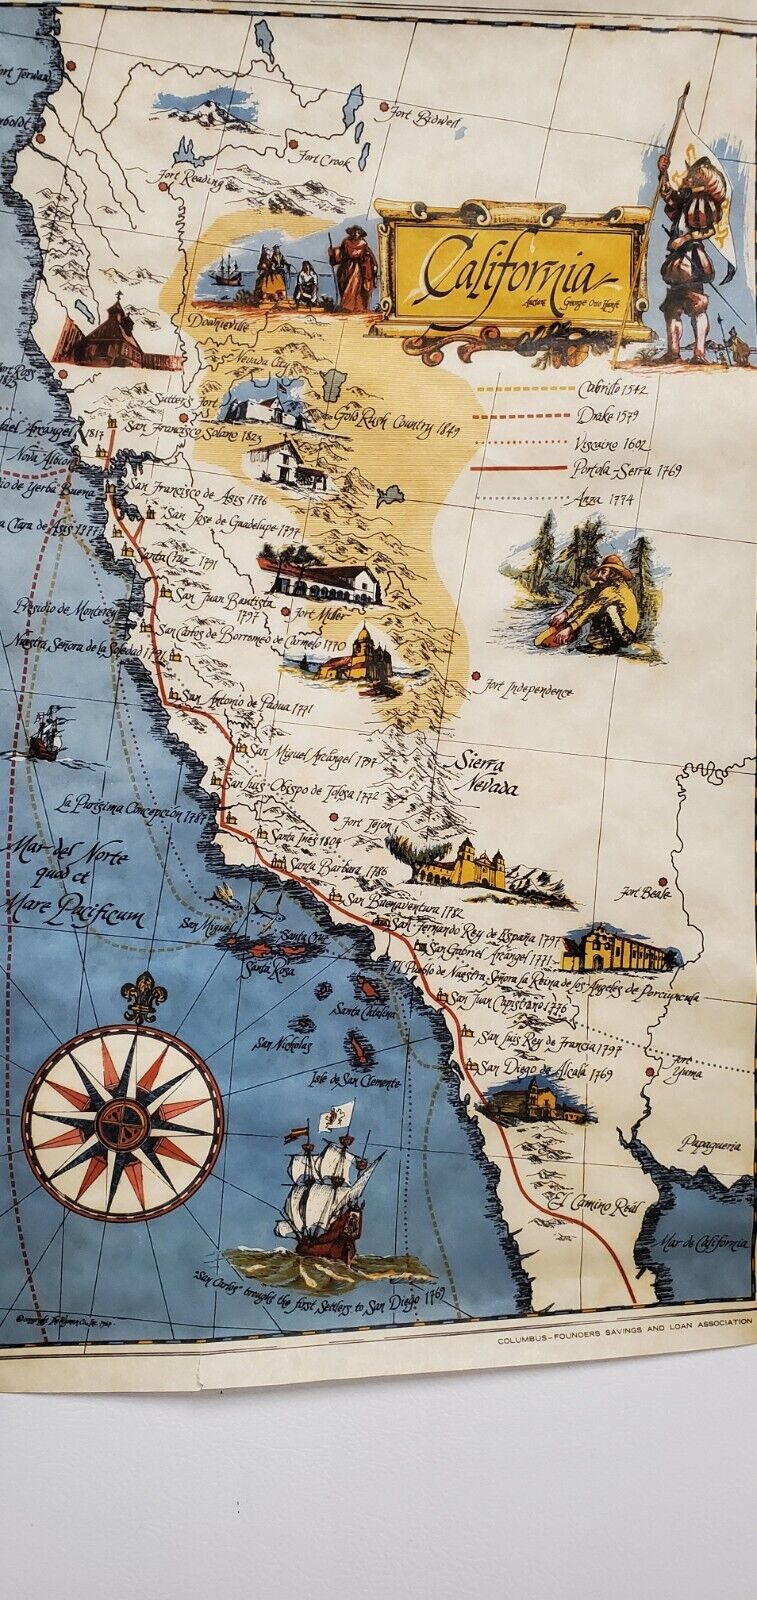 VINTAGE ILLUSTRATED MAP OF EARLY CALIFORNIA HISTORY BY GEORGE OTTO HANFT 1967. 